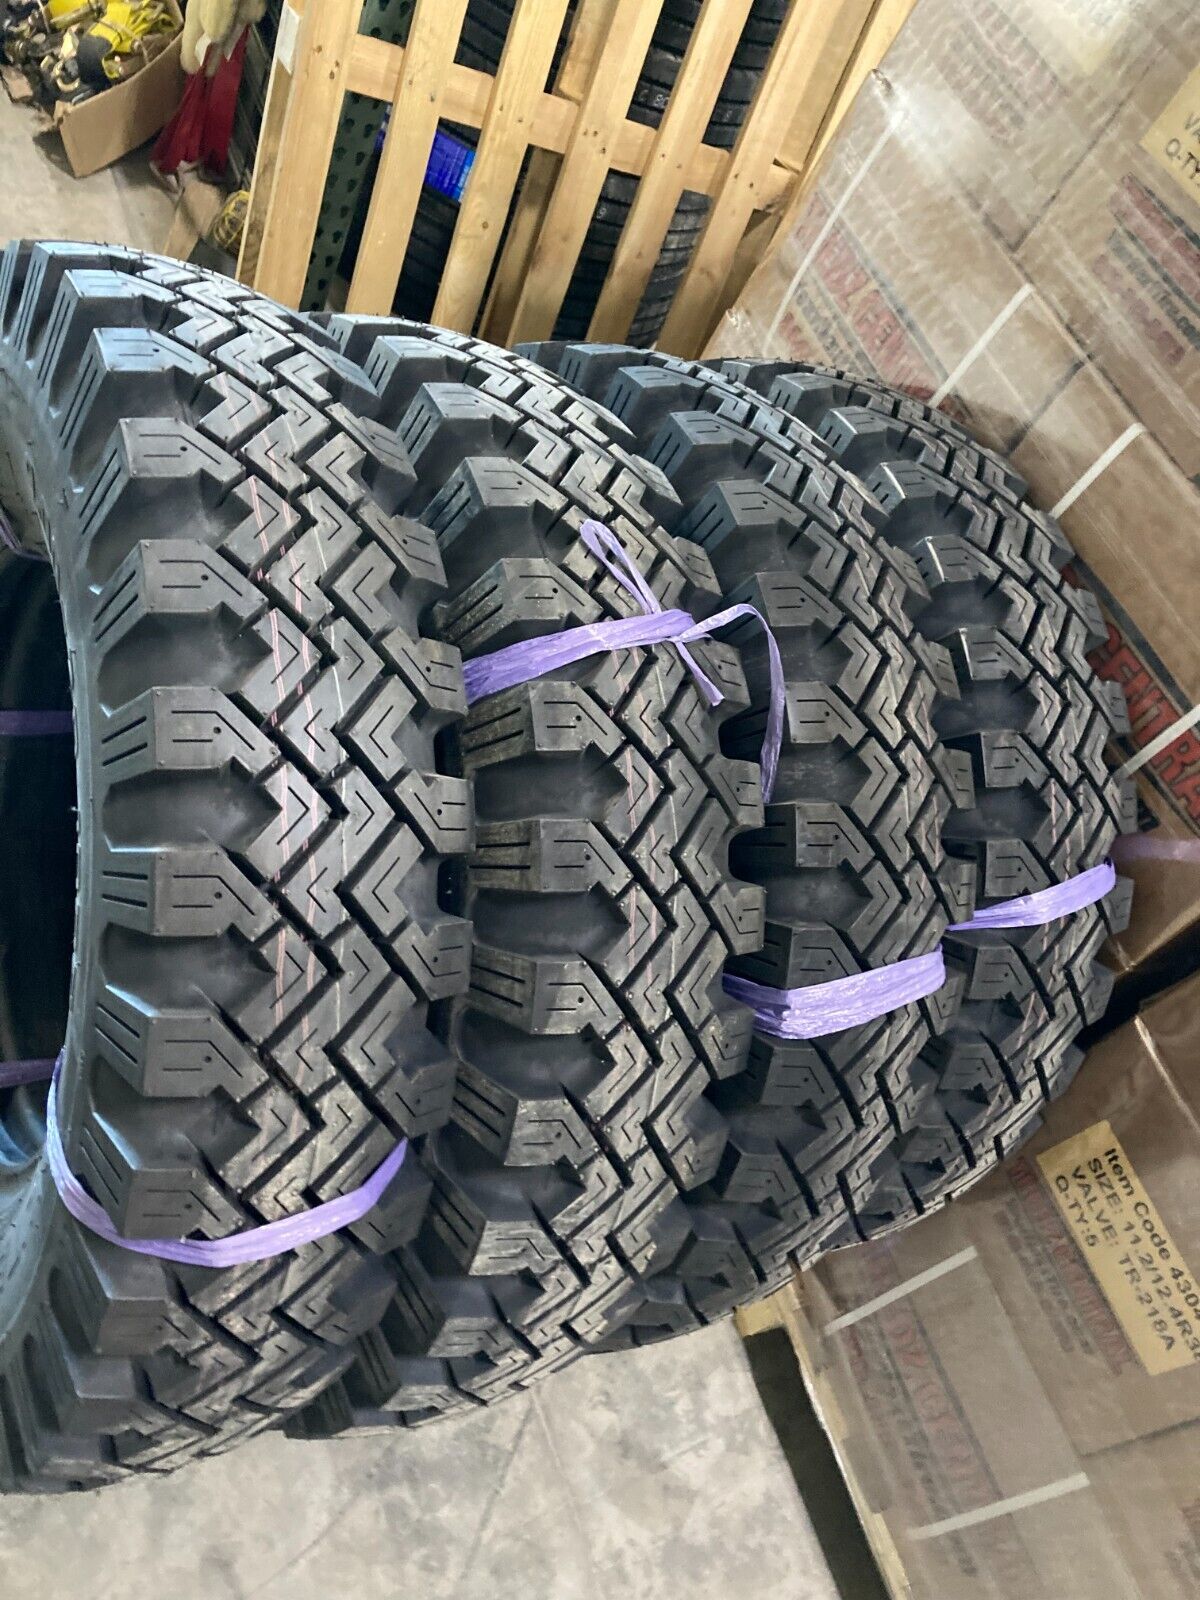 4 New Bias Tires 8.25 20 NUTECH N300 Super Traction 10ply Mud & Snow Tread